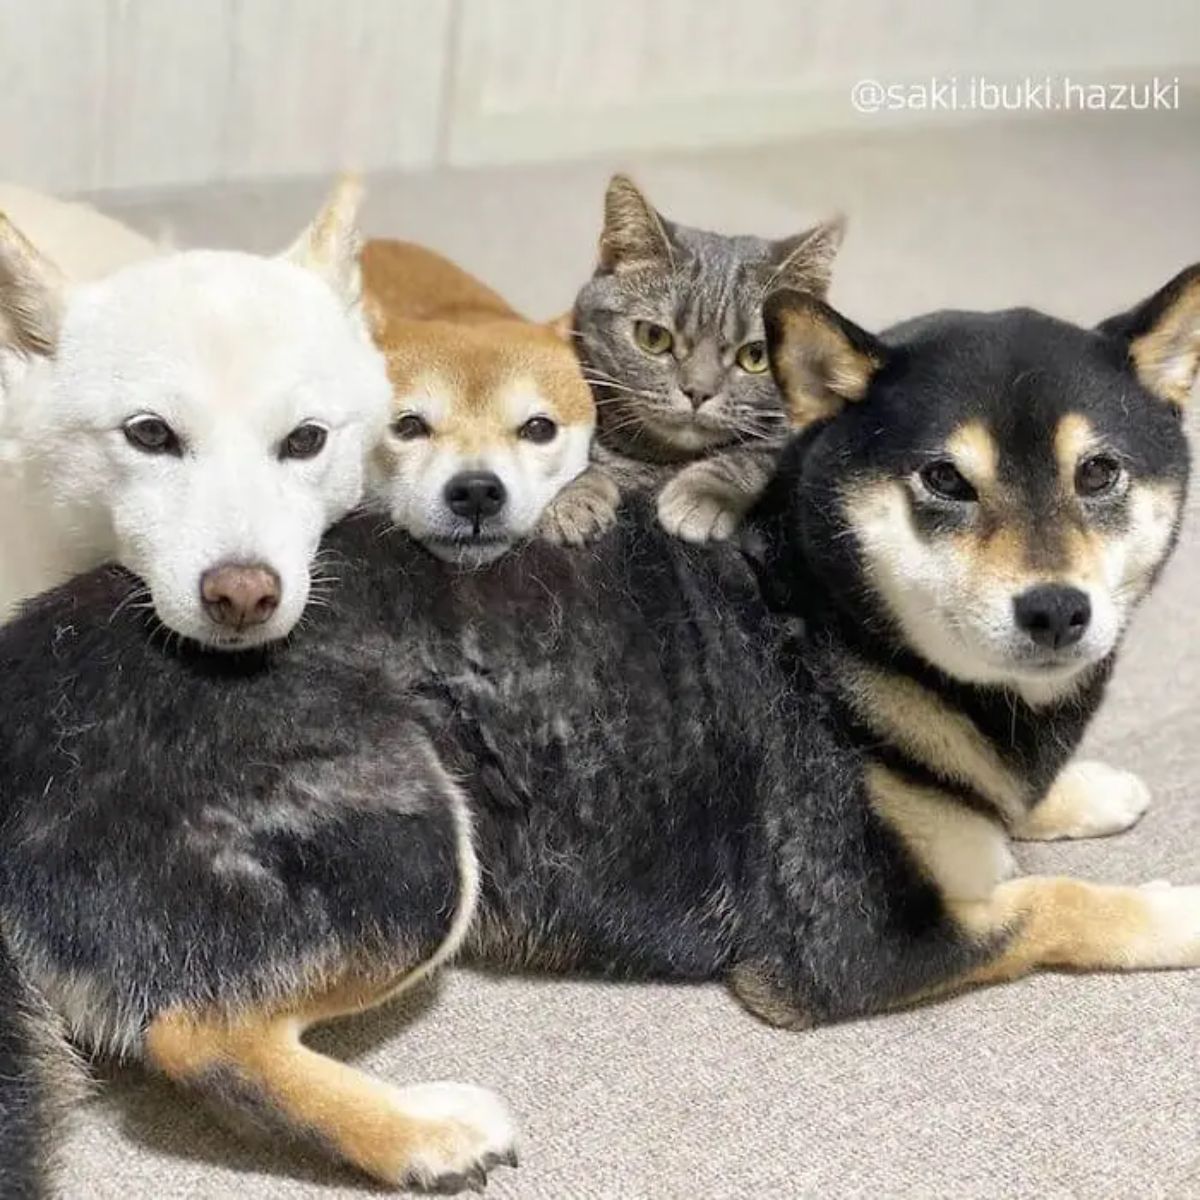 black shiba inu laying on the floor with white shiba inu and bornw shiba inu laying their chins on its back and grey tabby putting its front paws on the black shiba inu's back